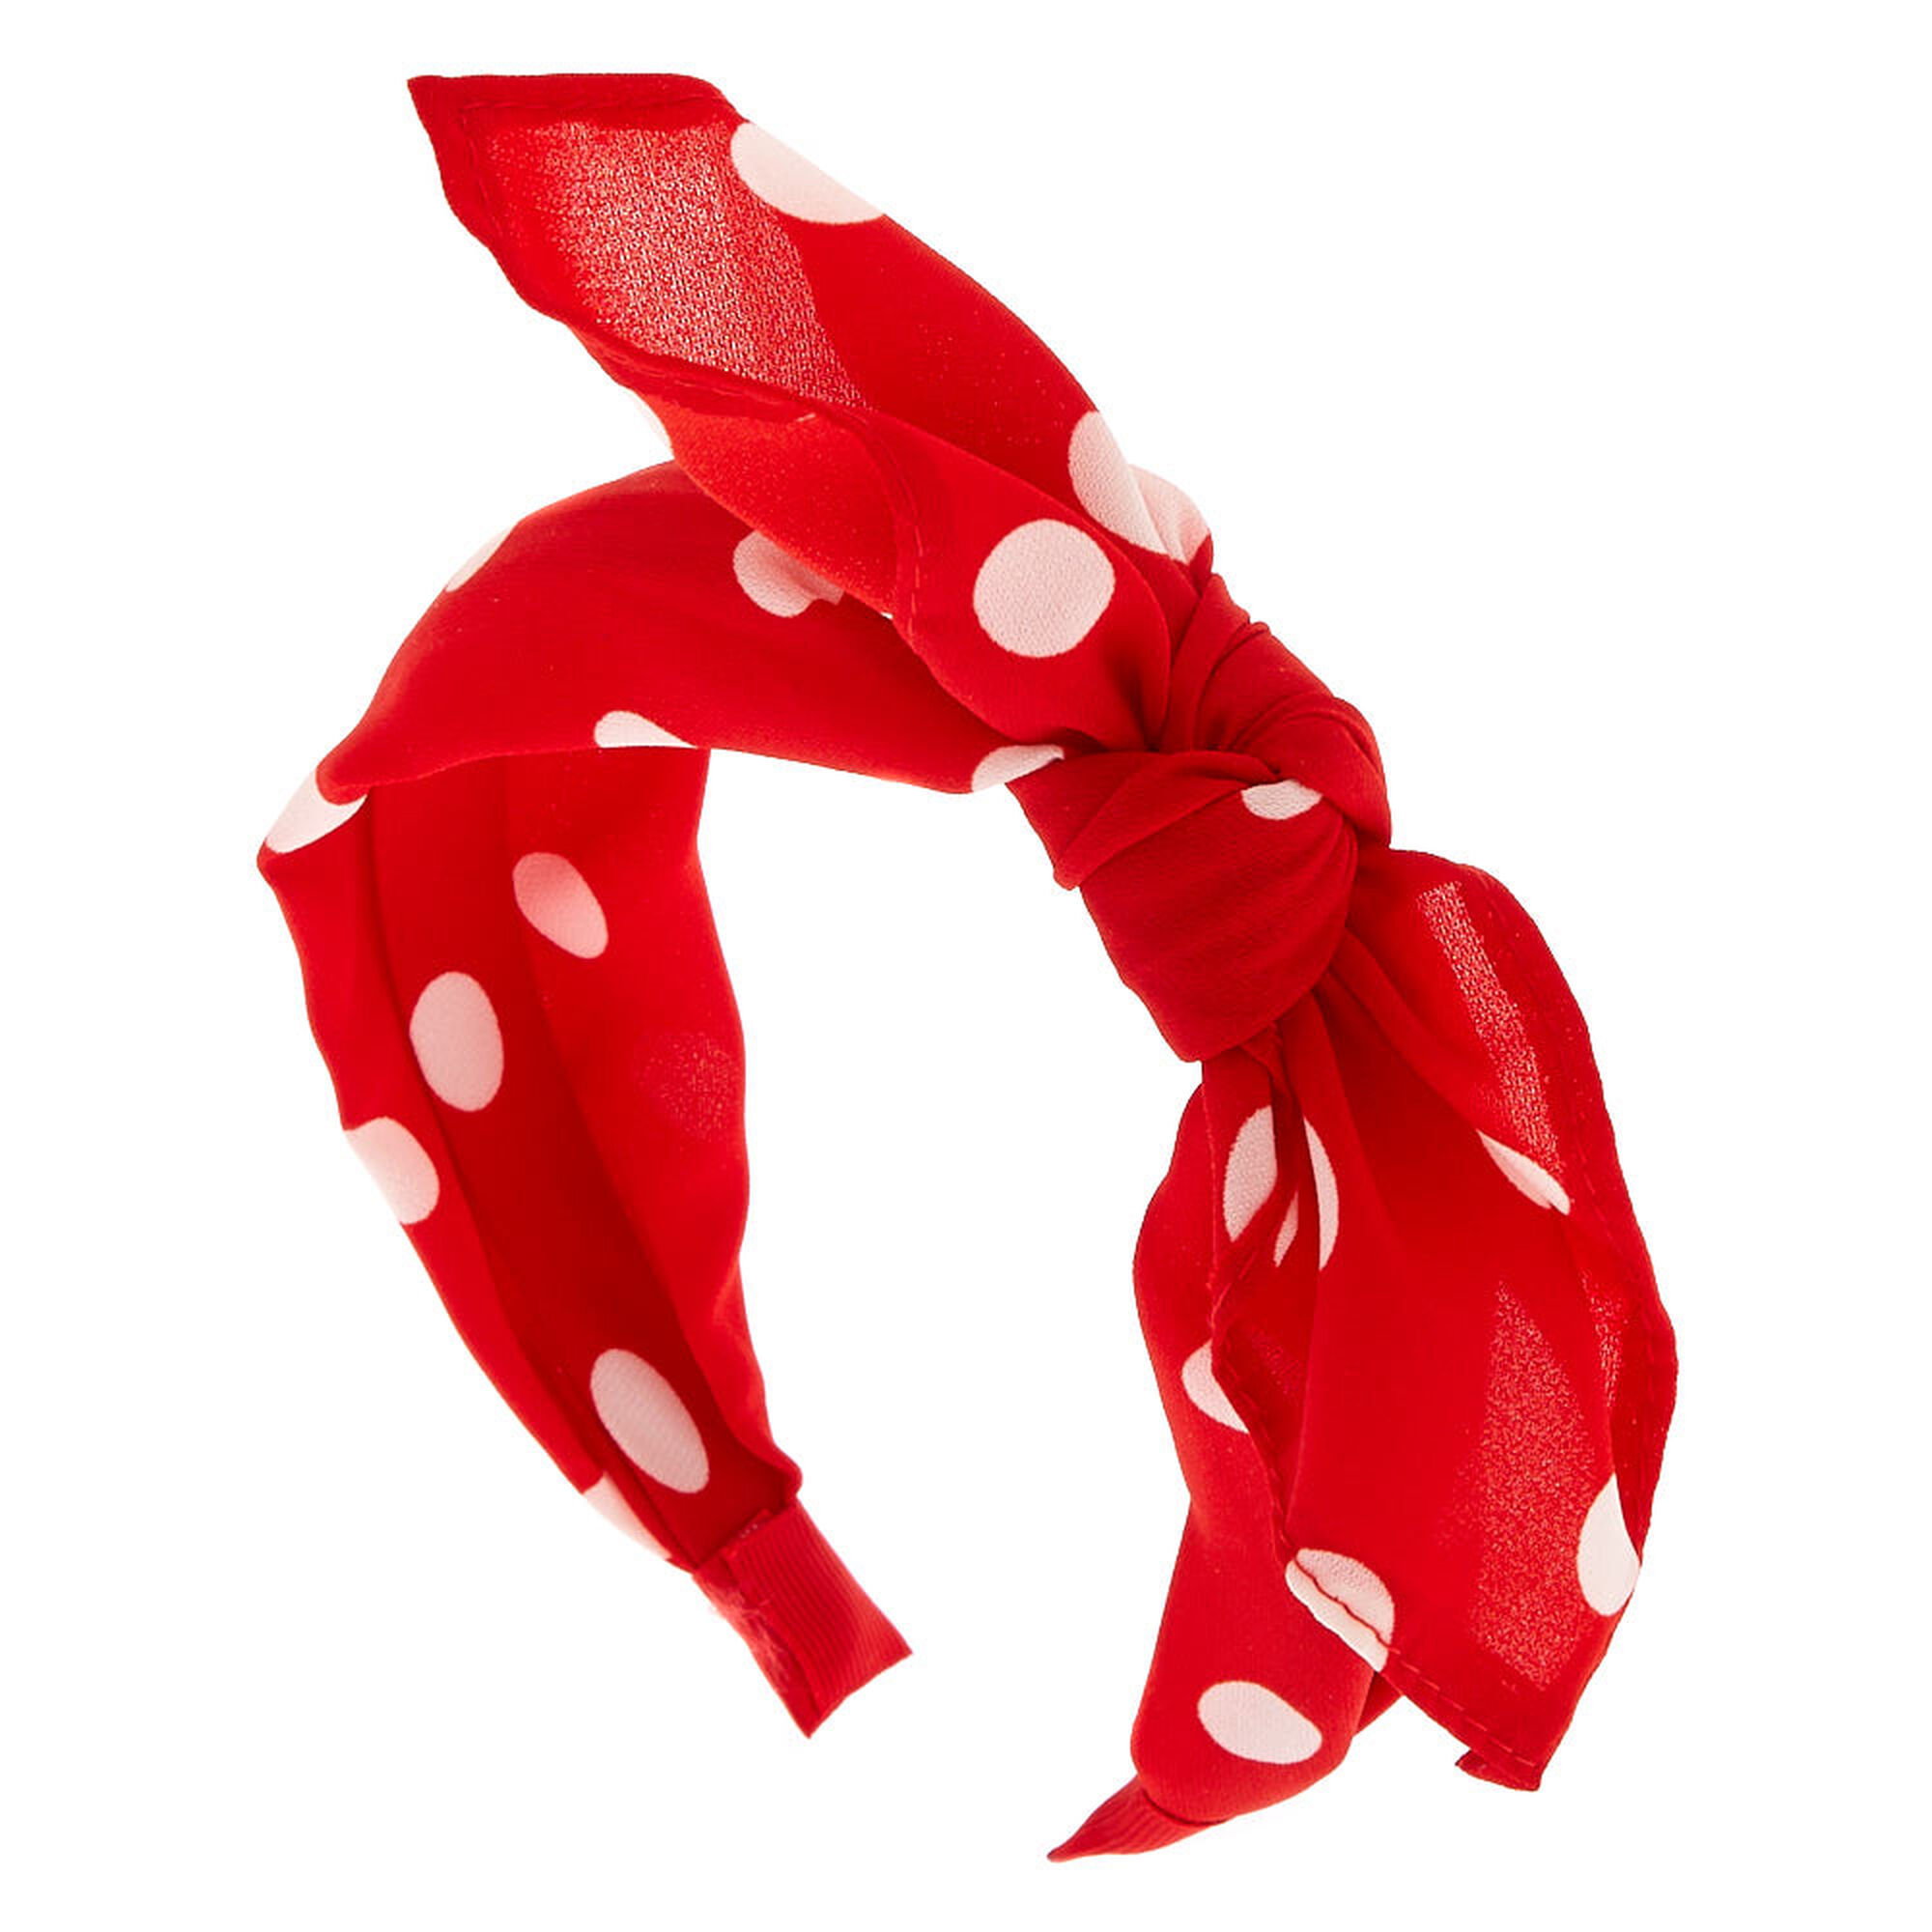 View Claires Polka Dot Knotted Bow Headband Red information